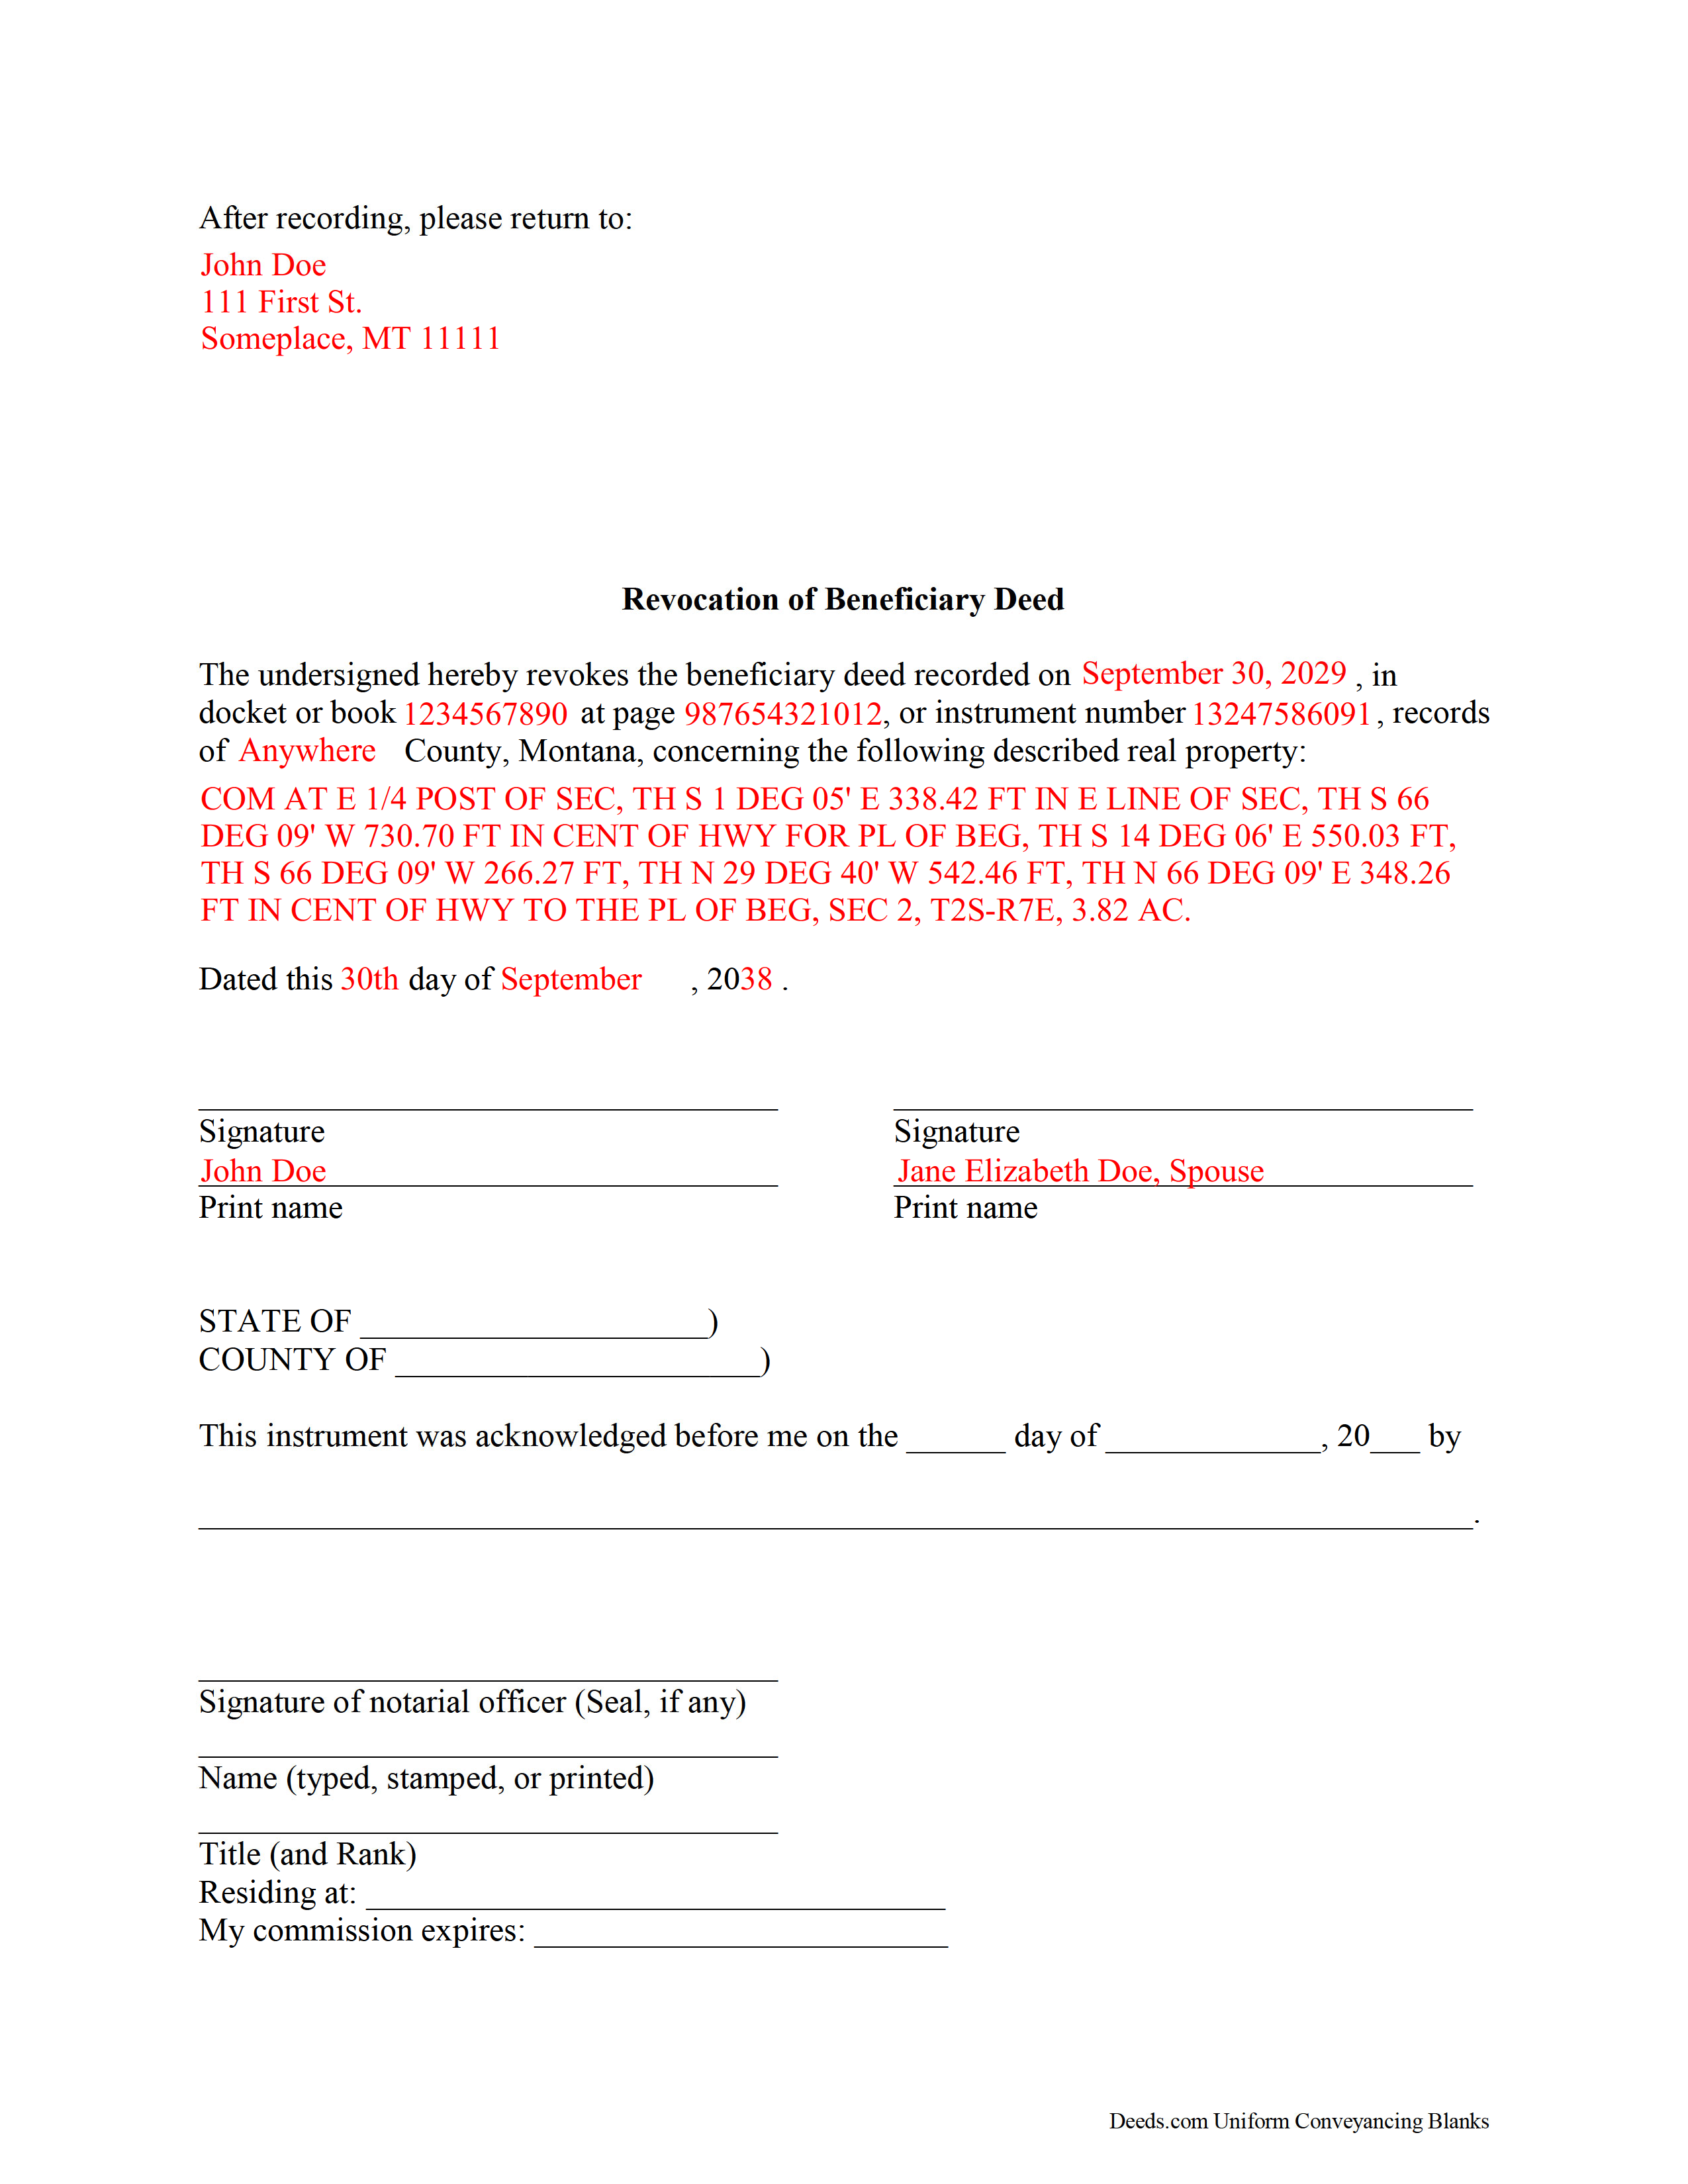 Completed Example of the Revocation of Beneficiary Deed Document